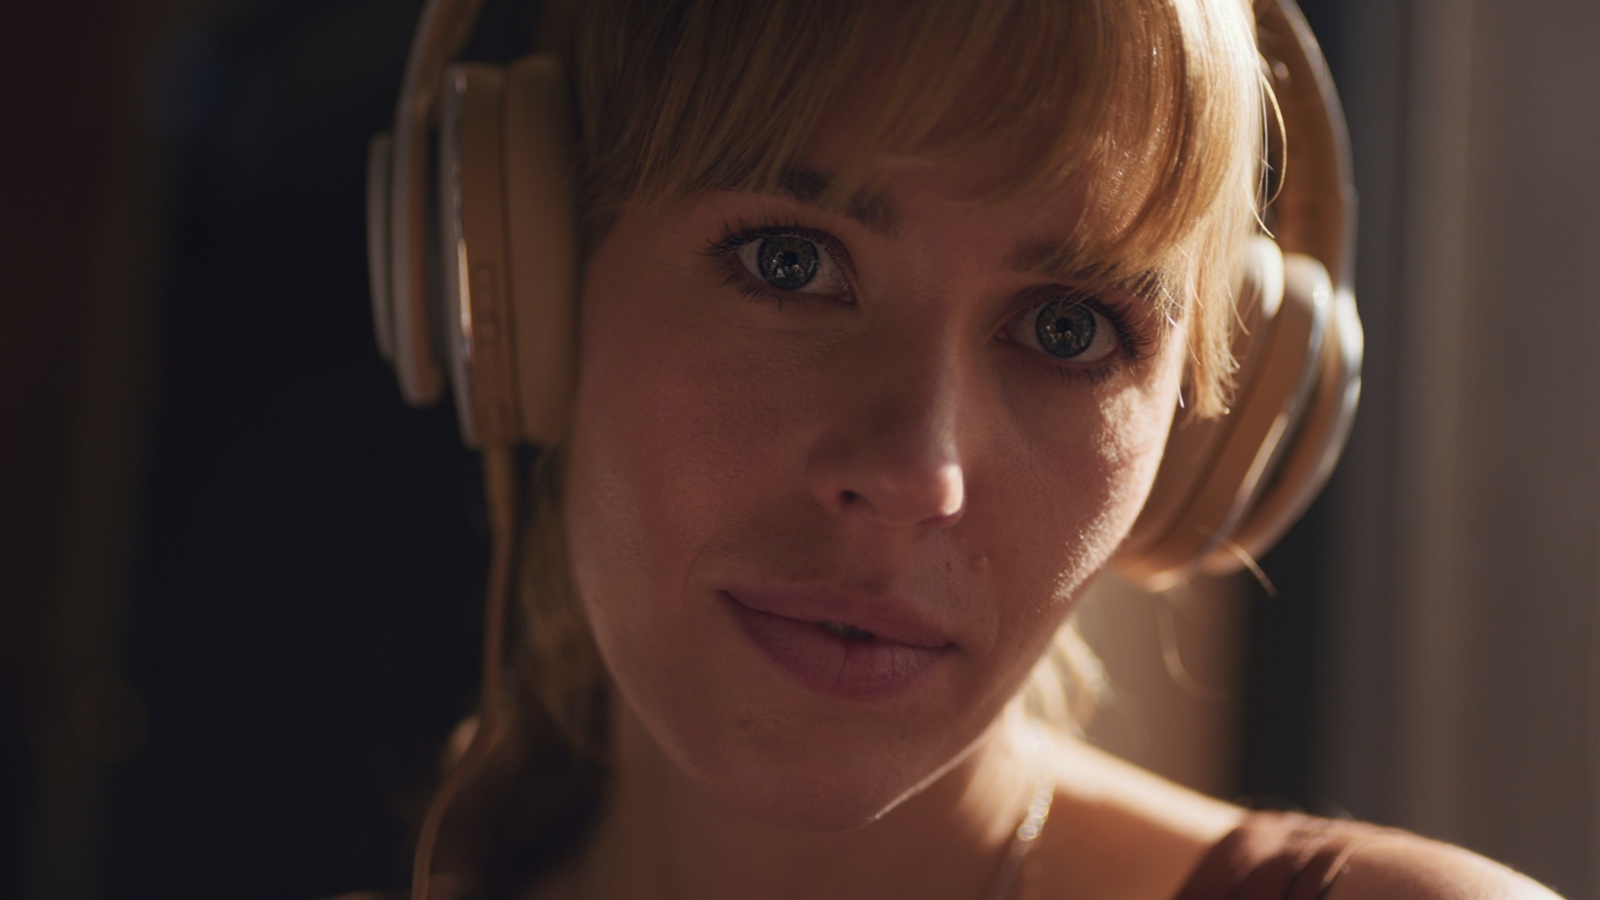 Recipe for Creating a Short Film Headshot of woman with long blond hair wearing light colored headphones posing for the camera